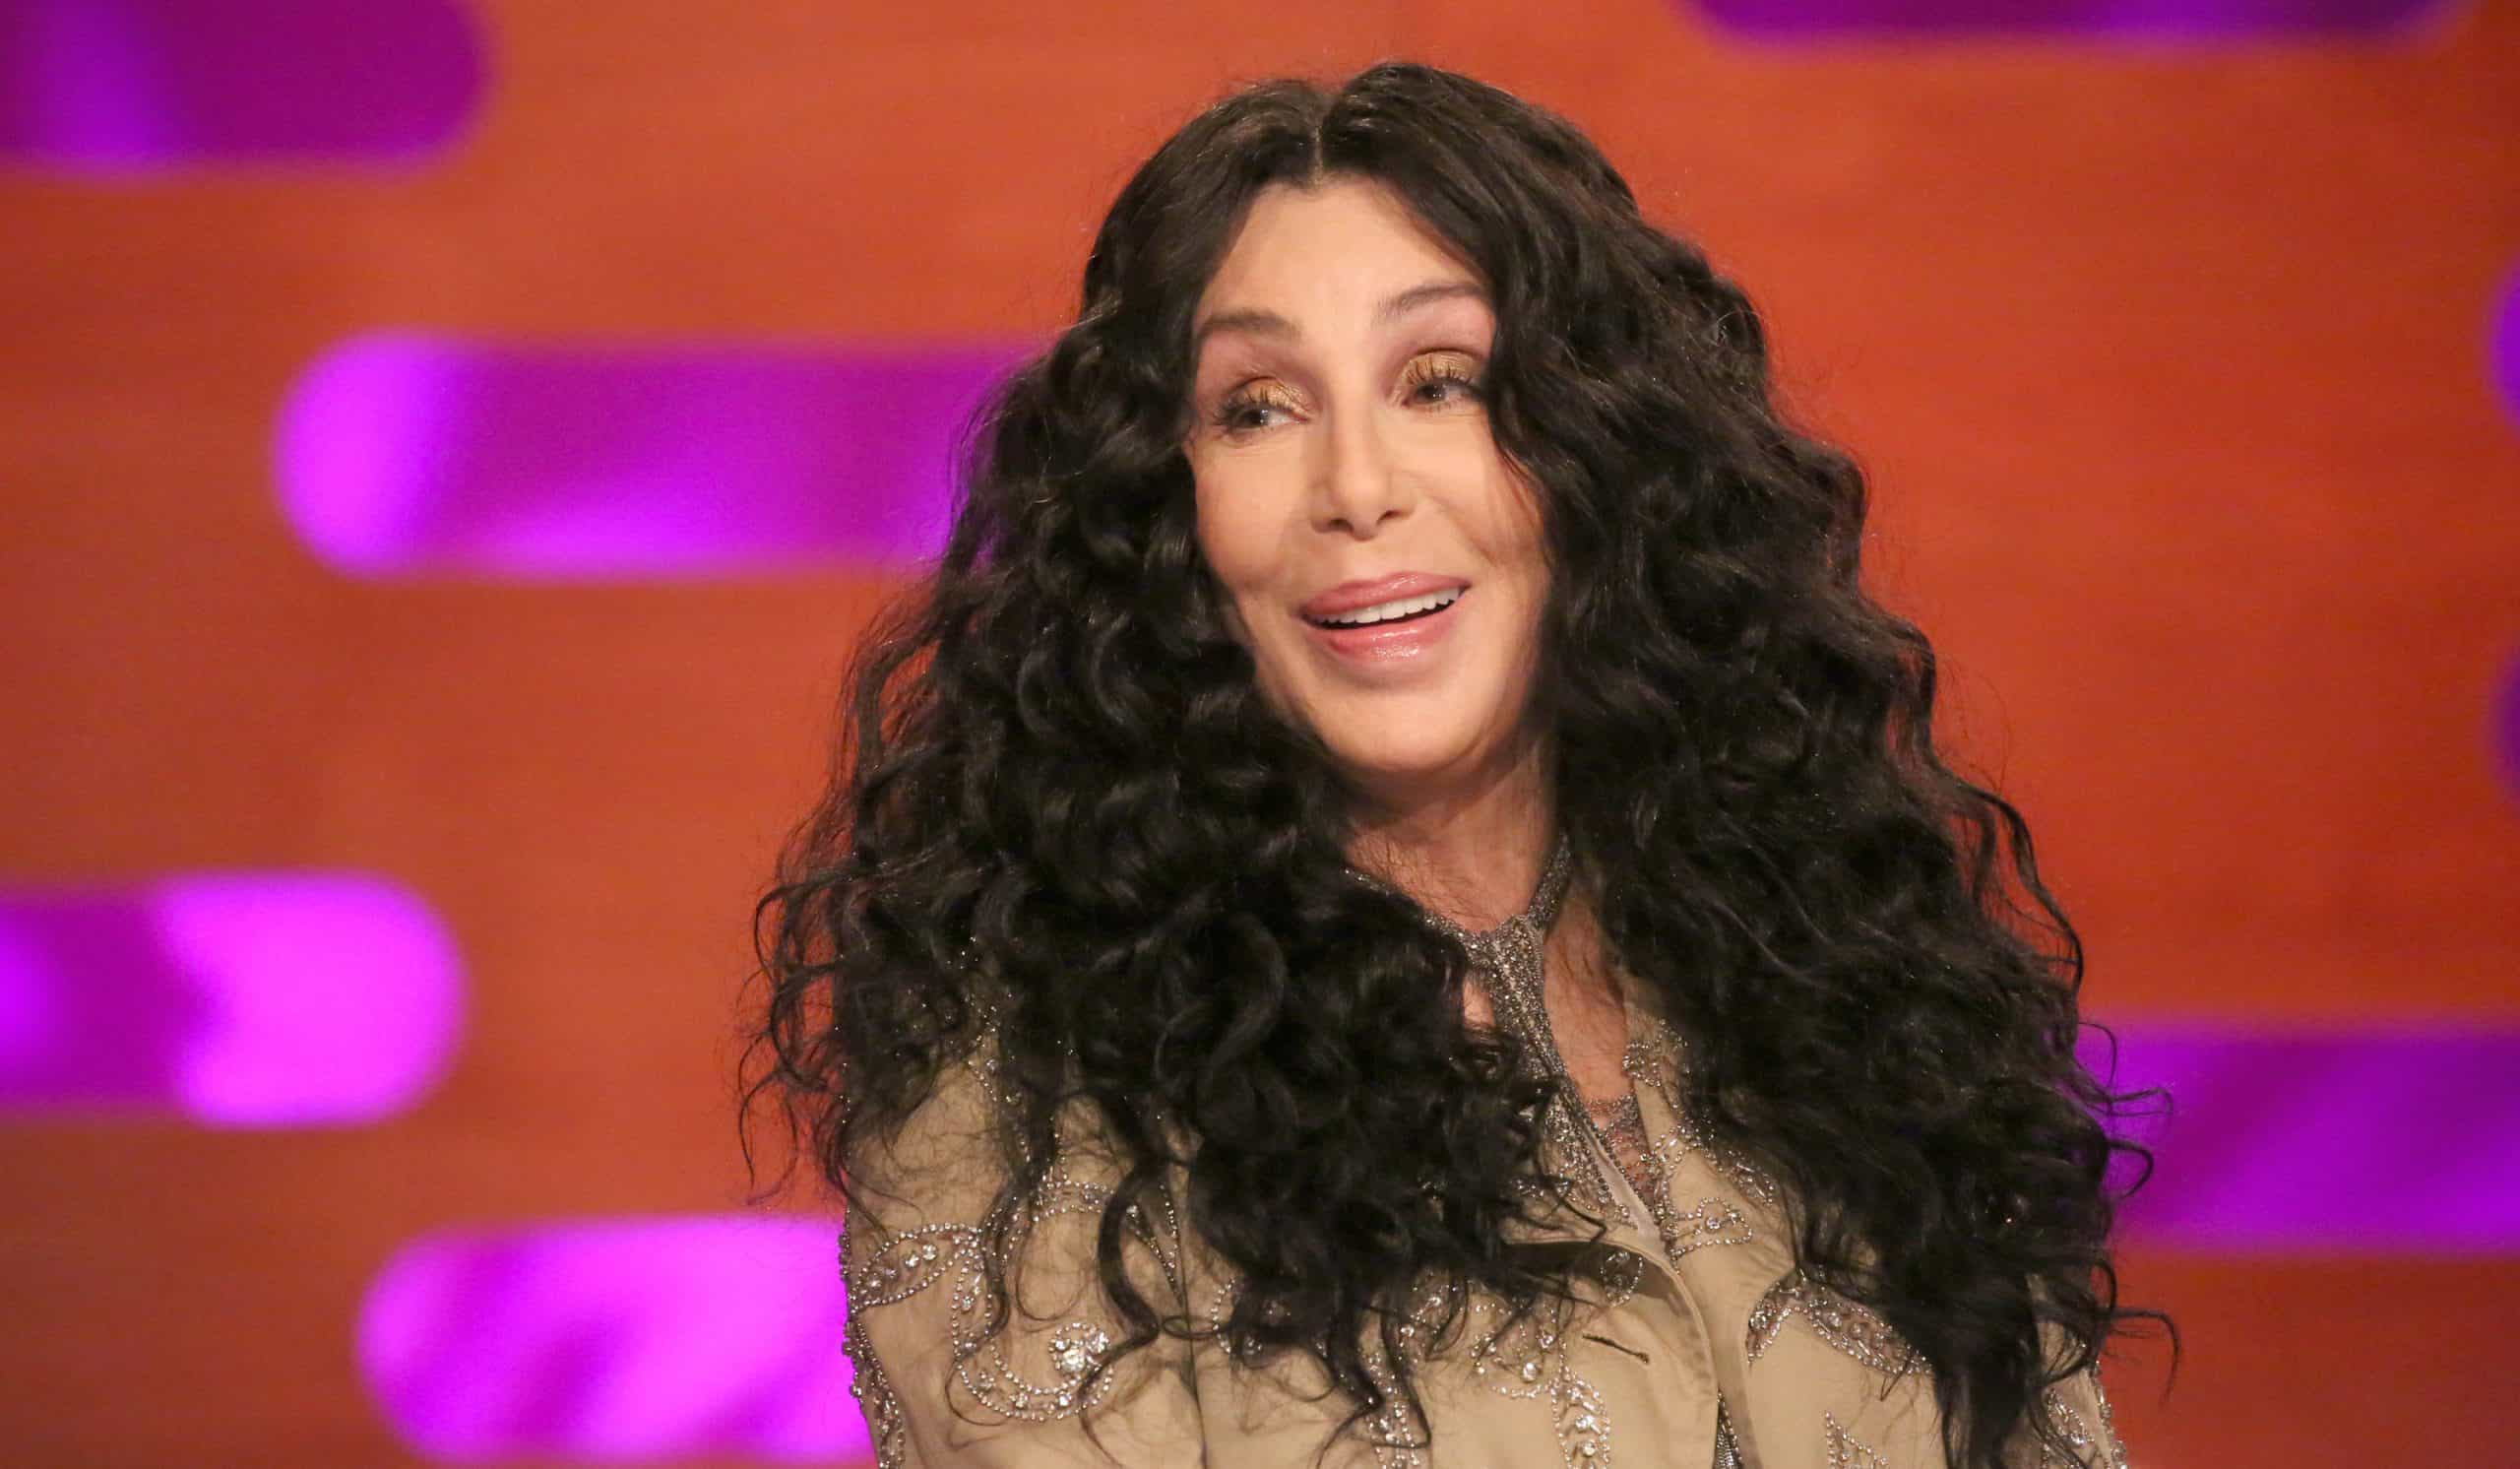 Cher has an extreme plan to deal with Vladimir Putin